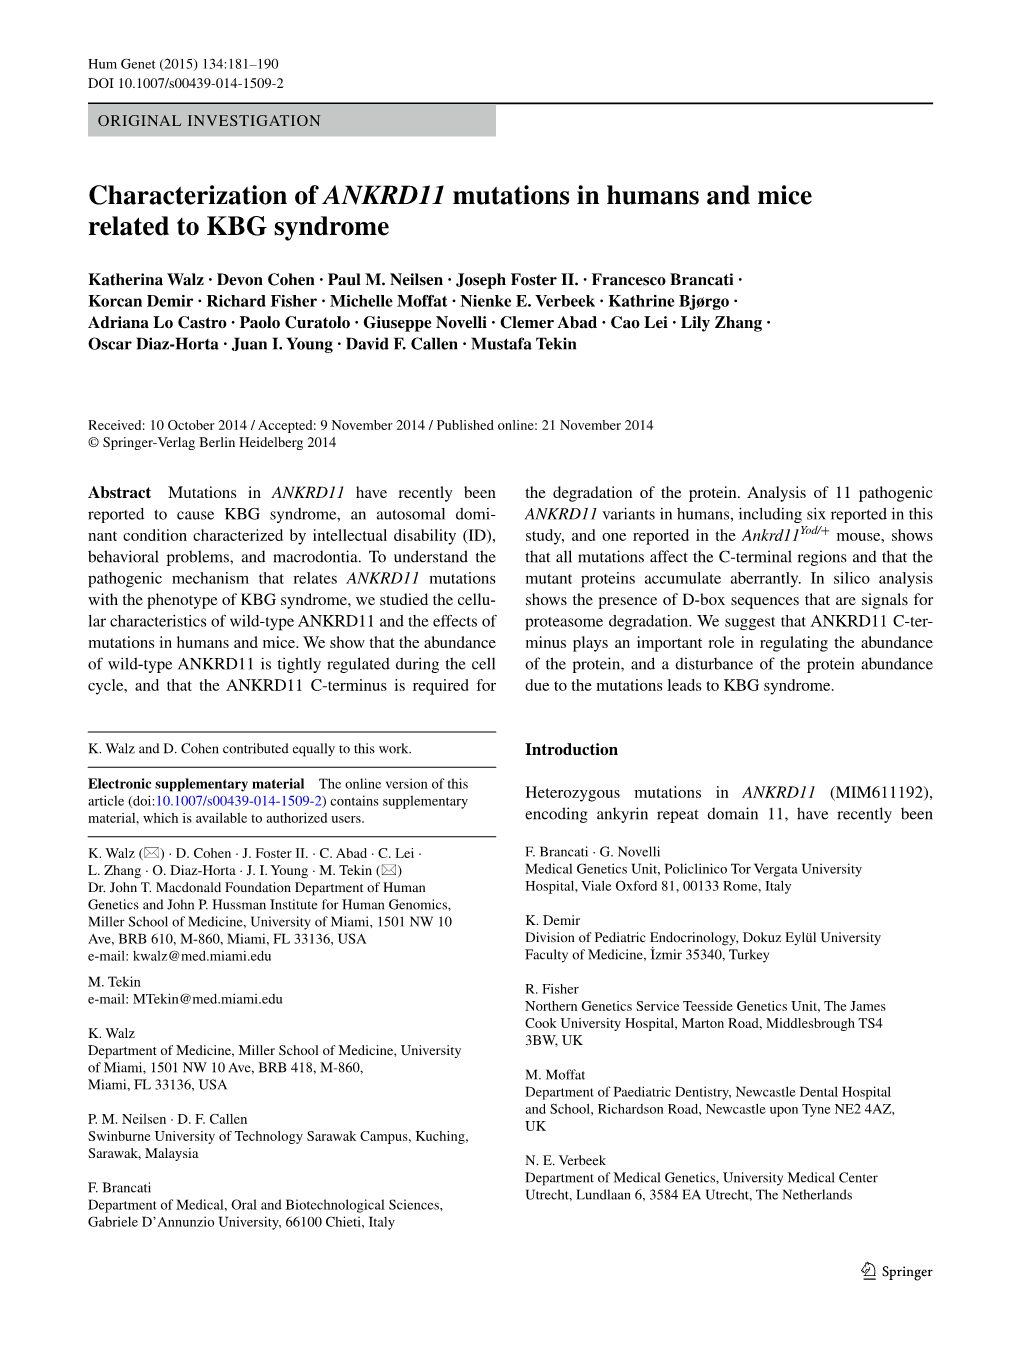 Characterization of ANKRD11 Mutations in Humans and Mice Related to KBG Syndrome